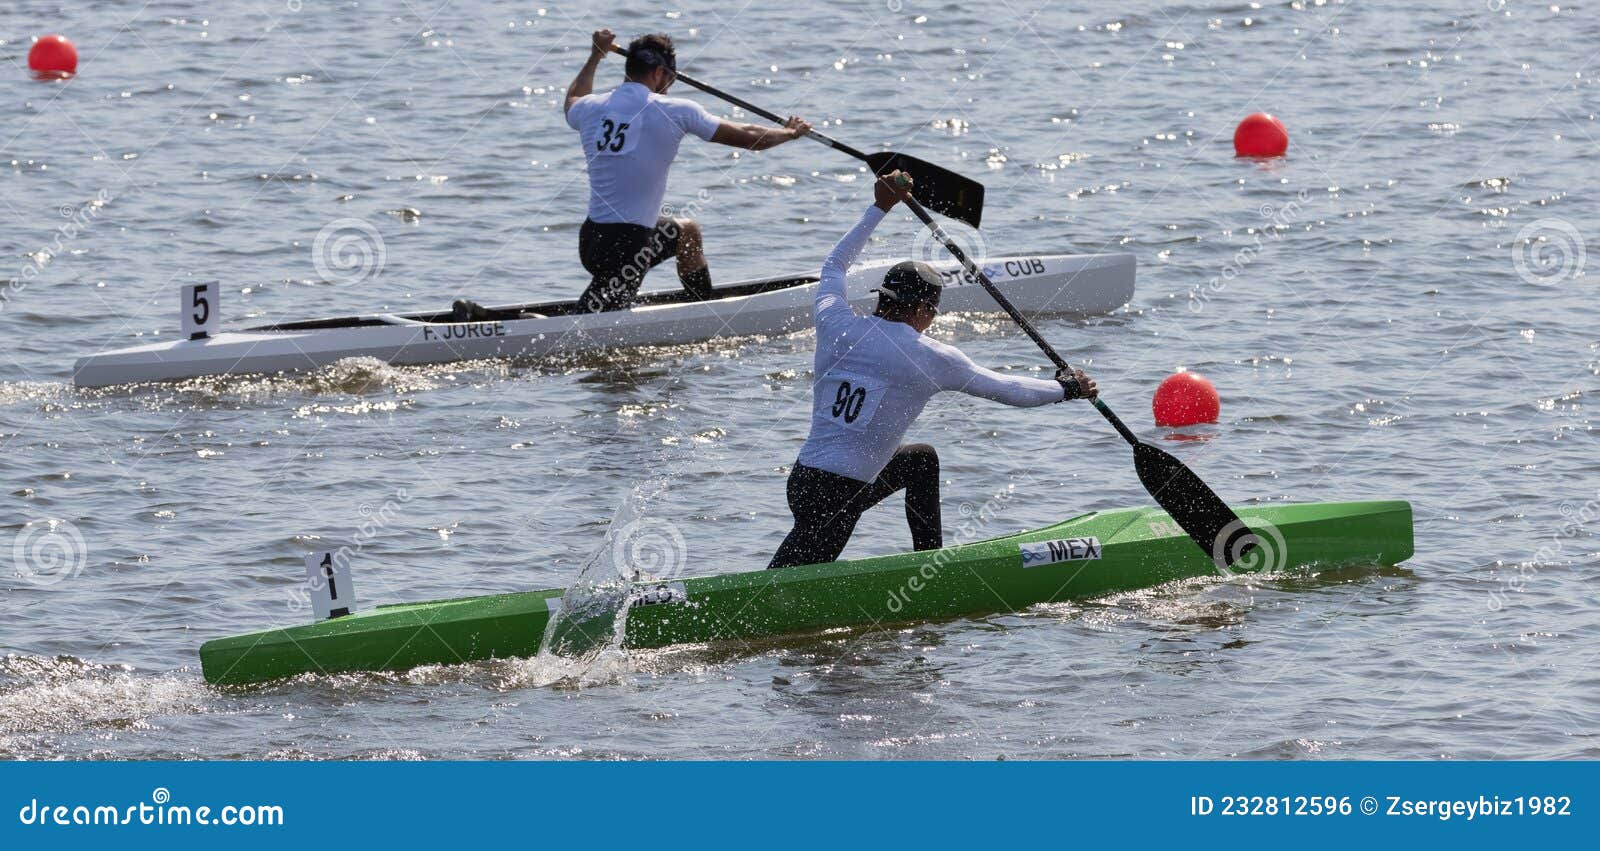 Barnaul Russia May Mexican Athlete Competing C M Event Icf Canoe Sprint World Cup Olympic Qualification Cuban F Jorge 232812596 